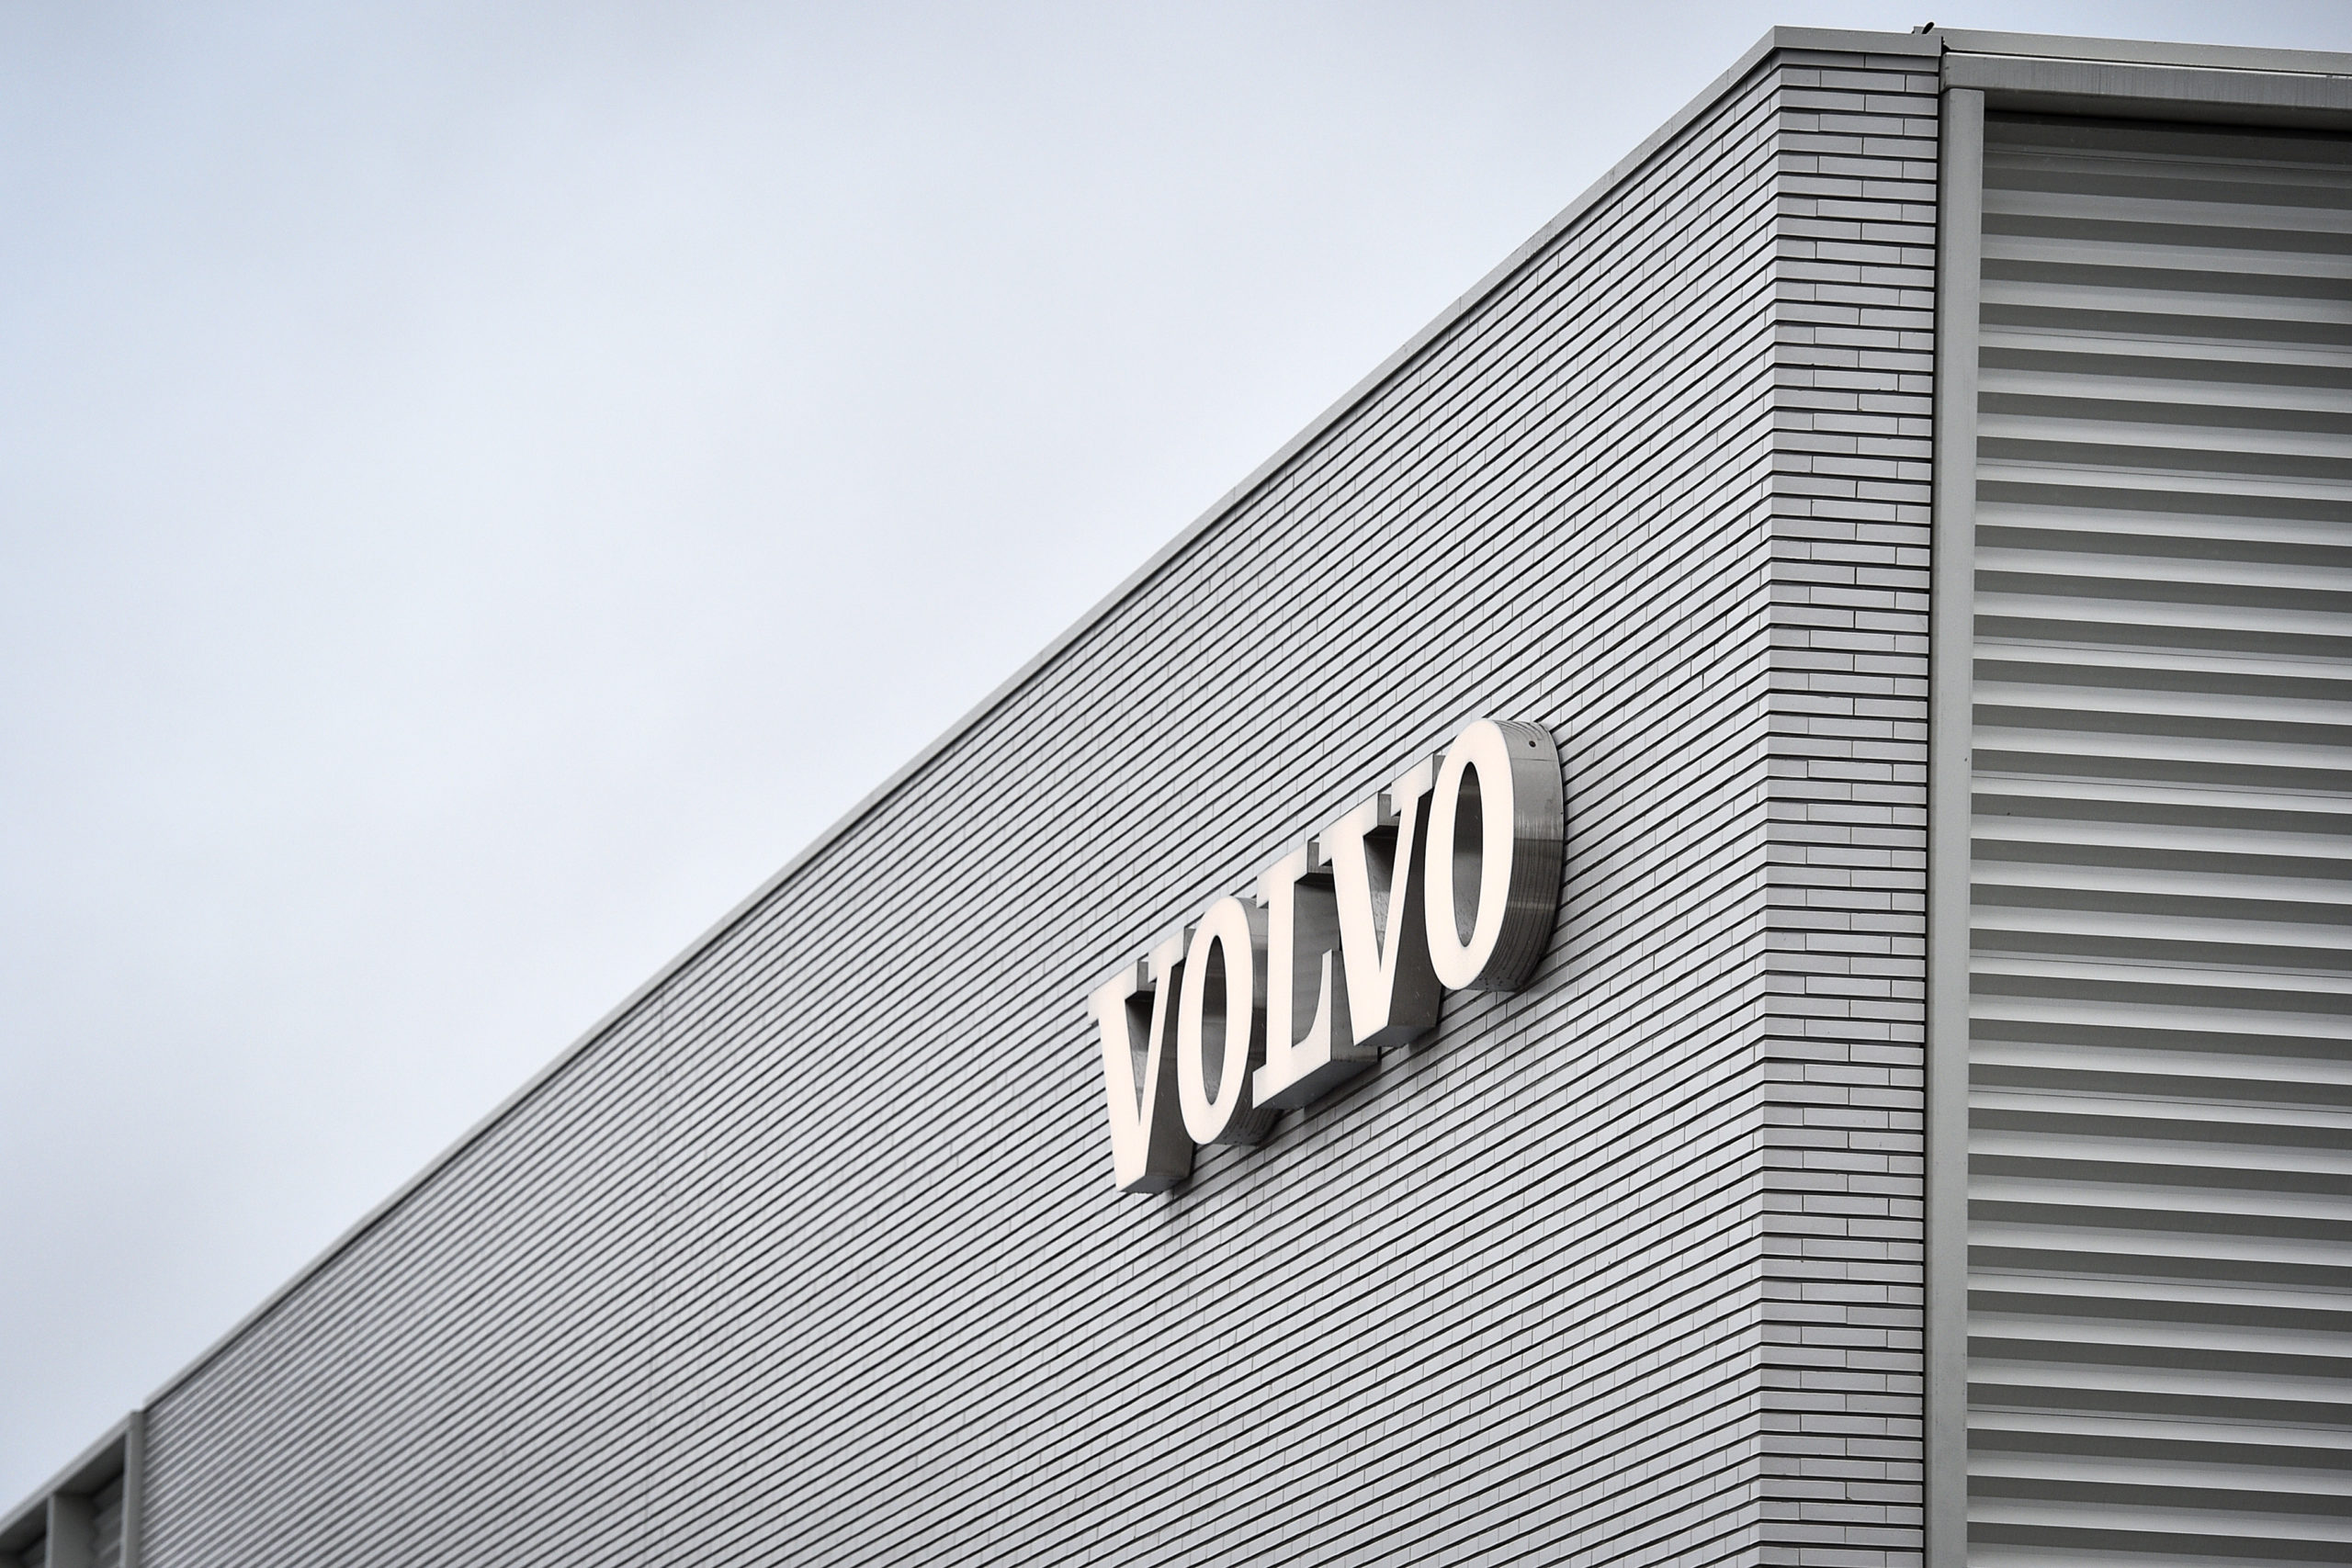 Ghent misses out on Volvo’s giga-factory for batteries